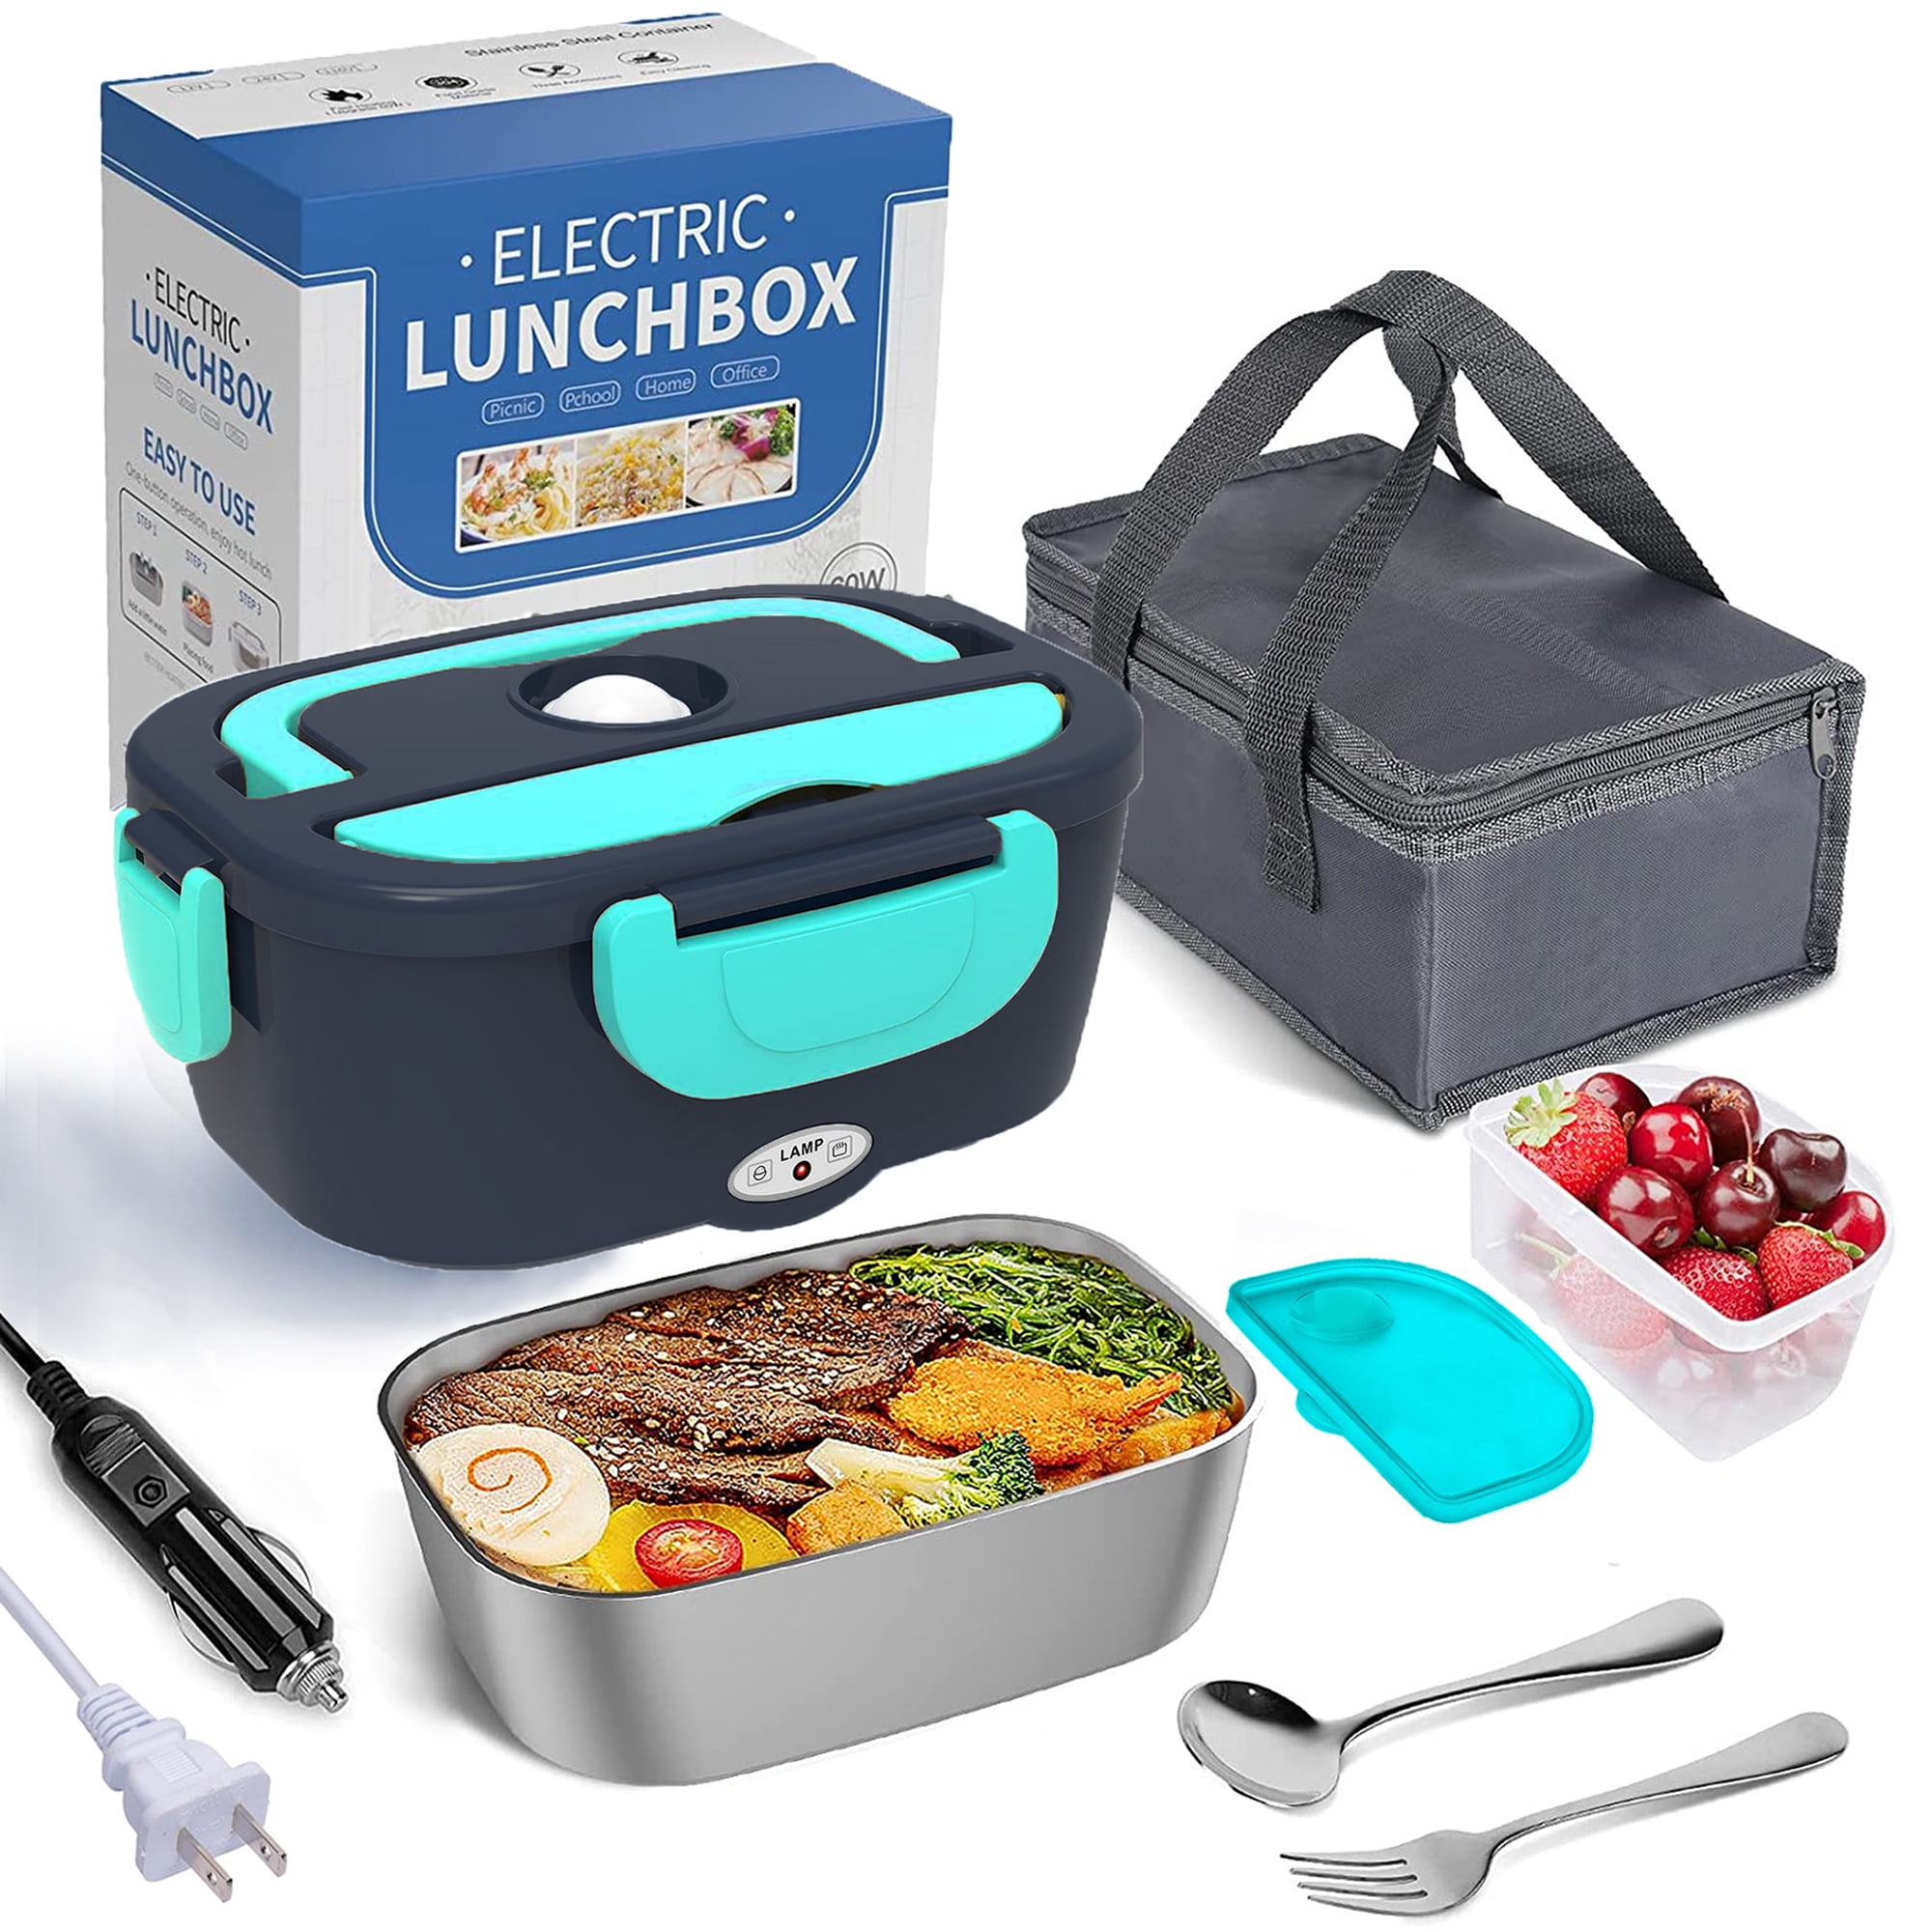 Are plastic or electric lunch boxes safe for kids? Here are some